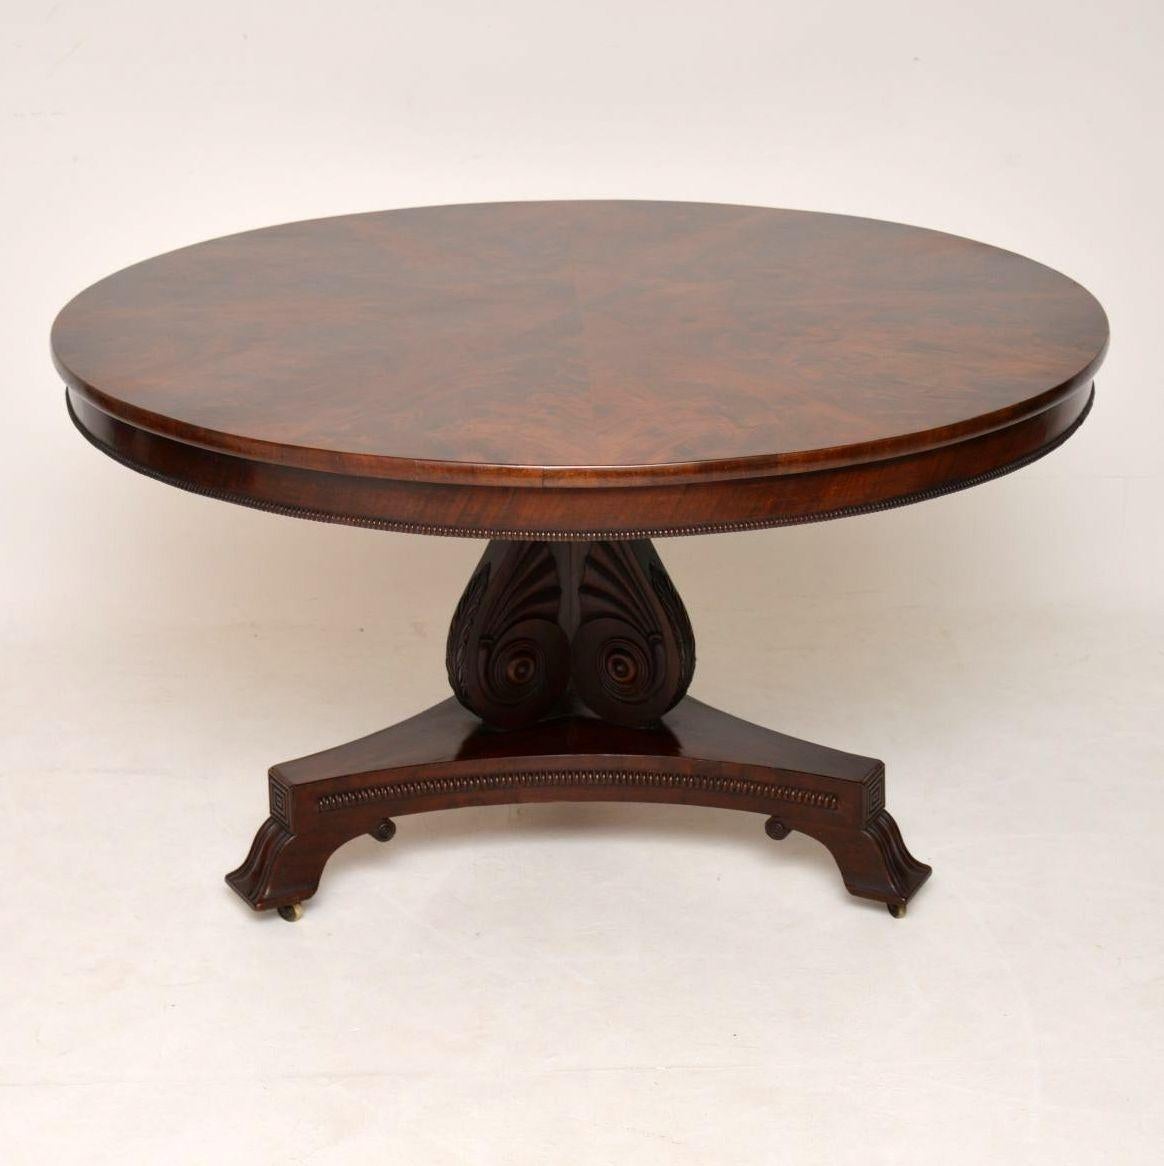 This antique Regency circular dining table is extremely high quality and has some wonderful designs on the table top, plus on the base. It’s in excellent original condition and dates from the 1820s-1830s period. The table top is flat, free from